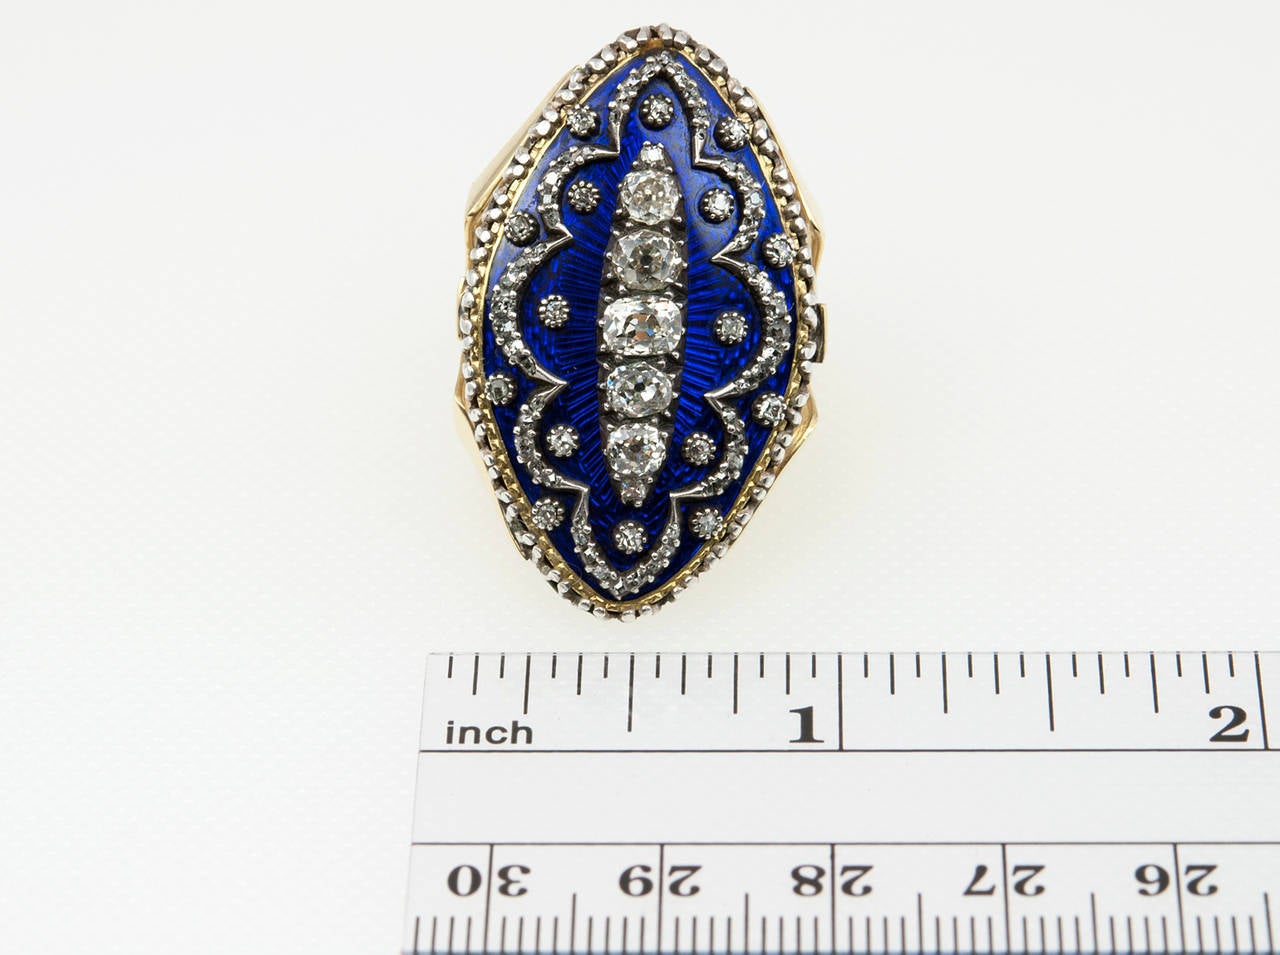 This navette shaped ring is very unique! It has beautiful dark blue enamel with five Old Mine Cut diamonds, which total approximately 1.30 carats of diamonds, with additional small rose cut diamonds in an abstract design in sterling silver over 18